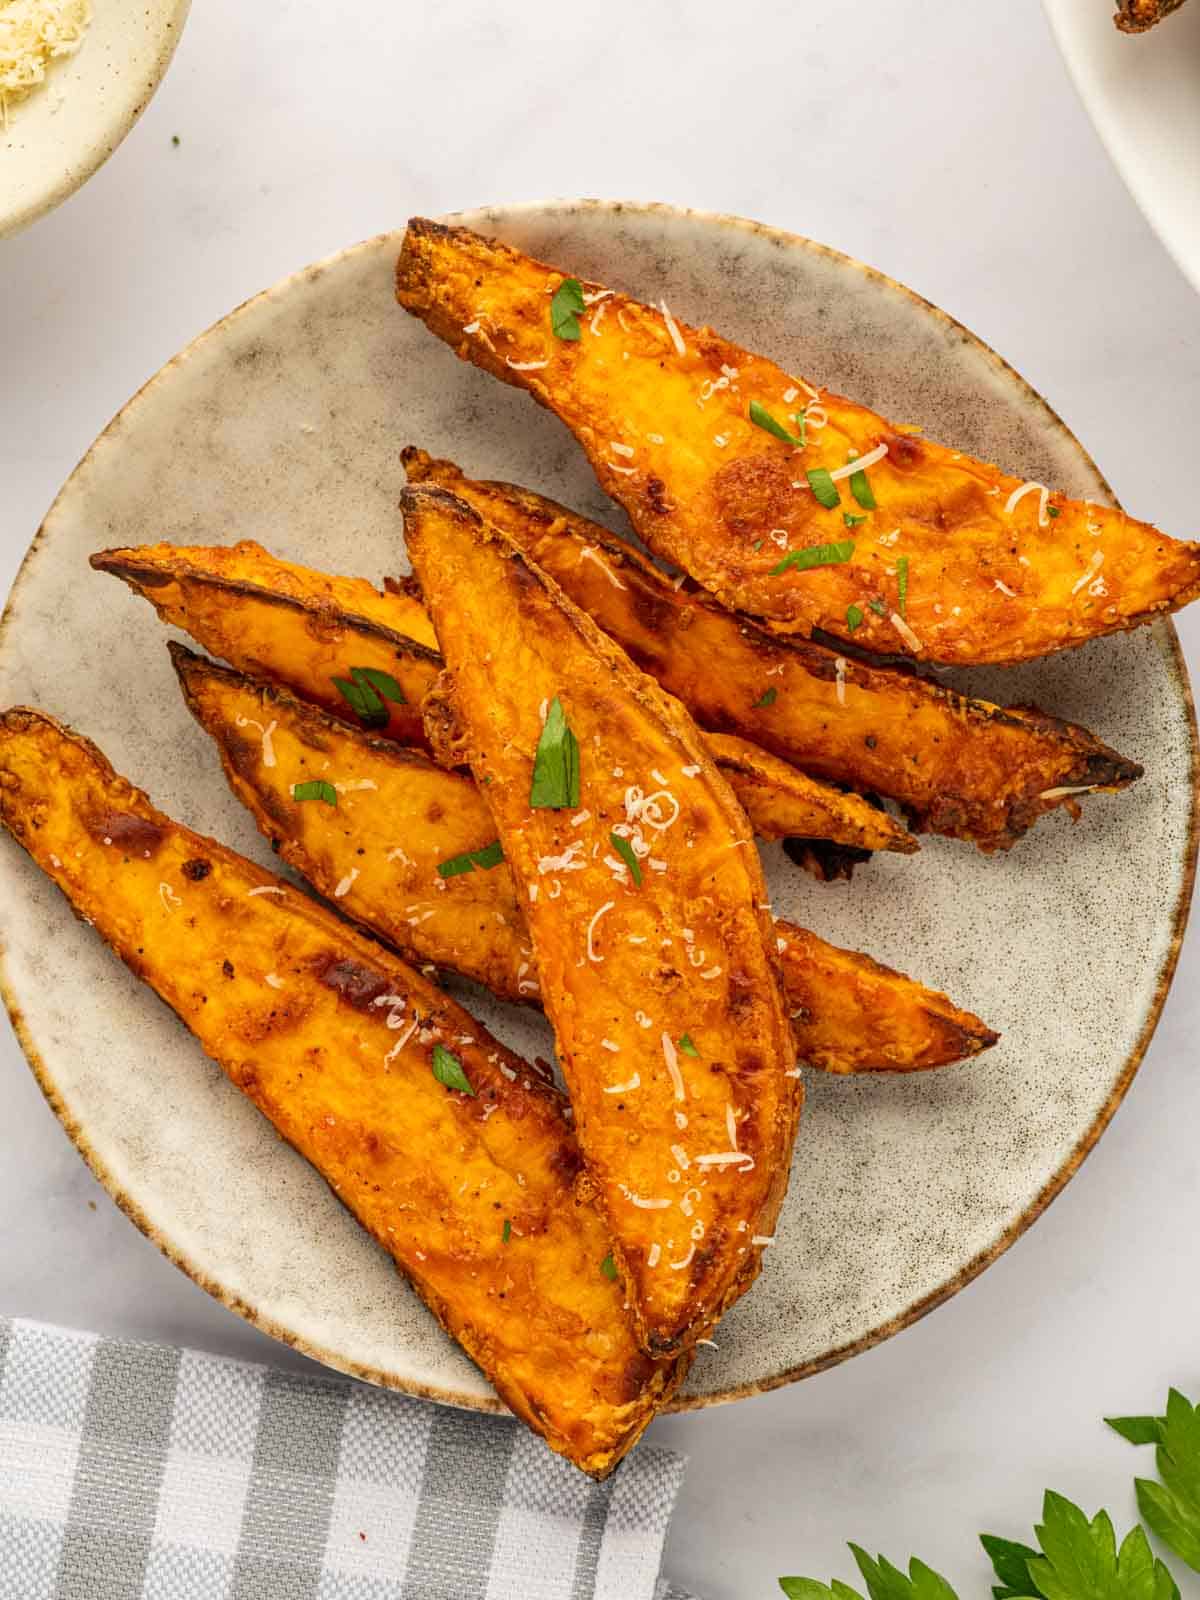 Several sweet potato wedges on a plate.